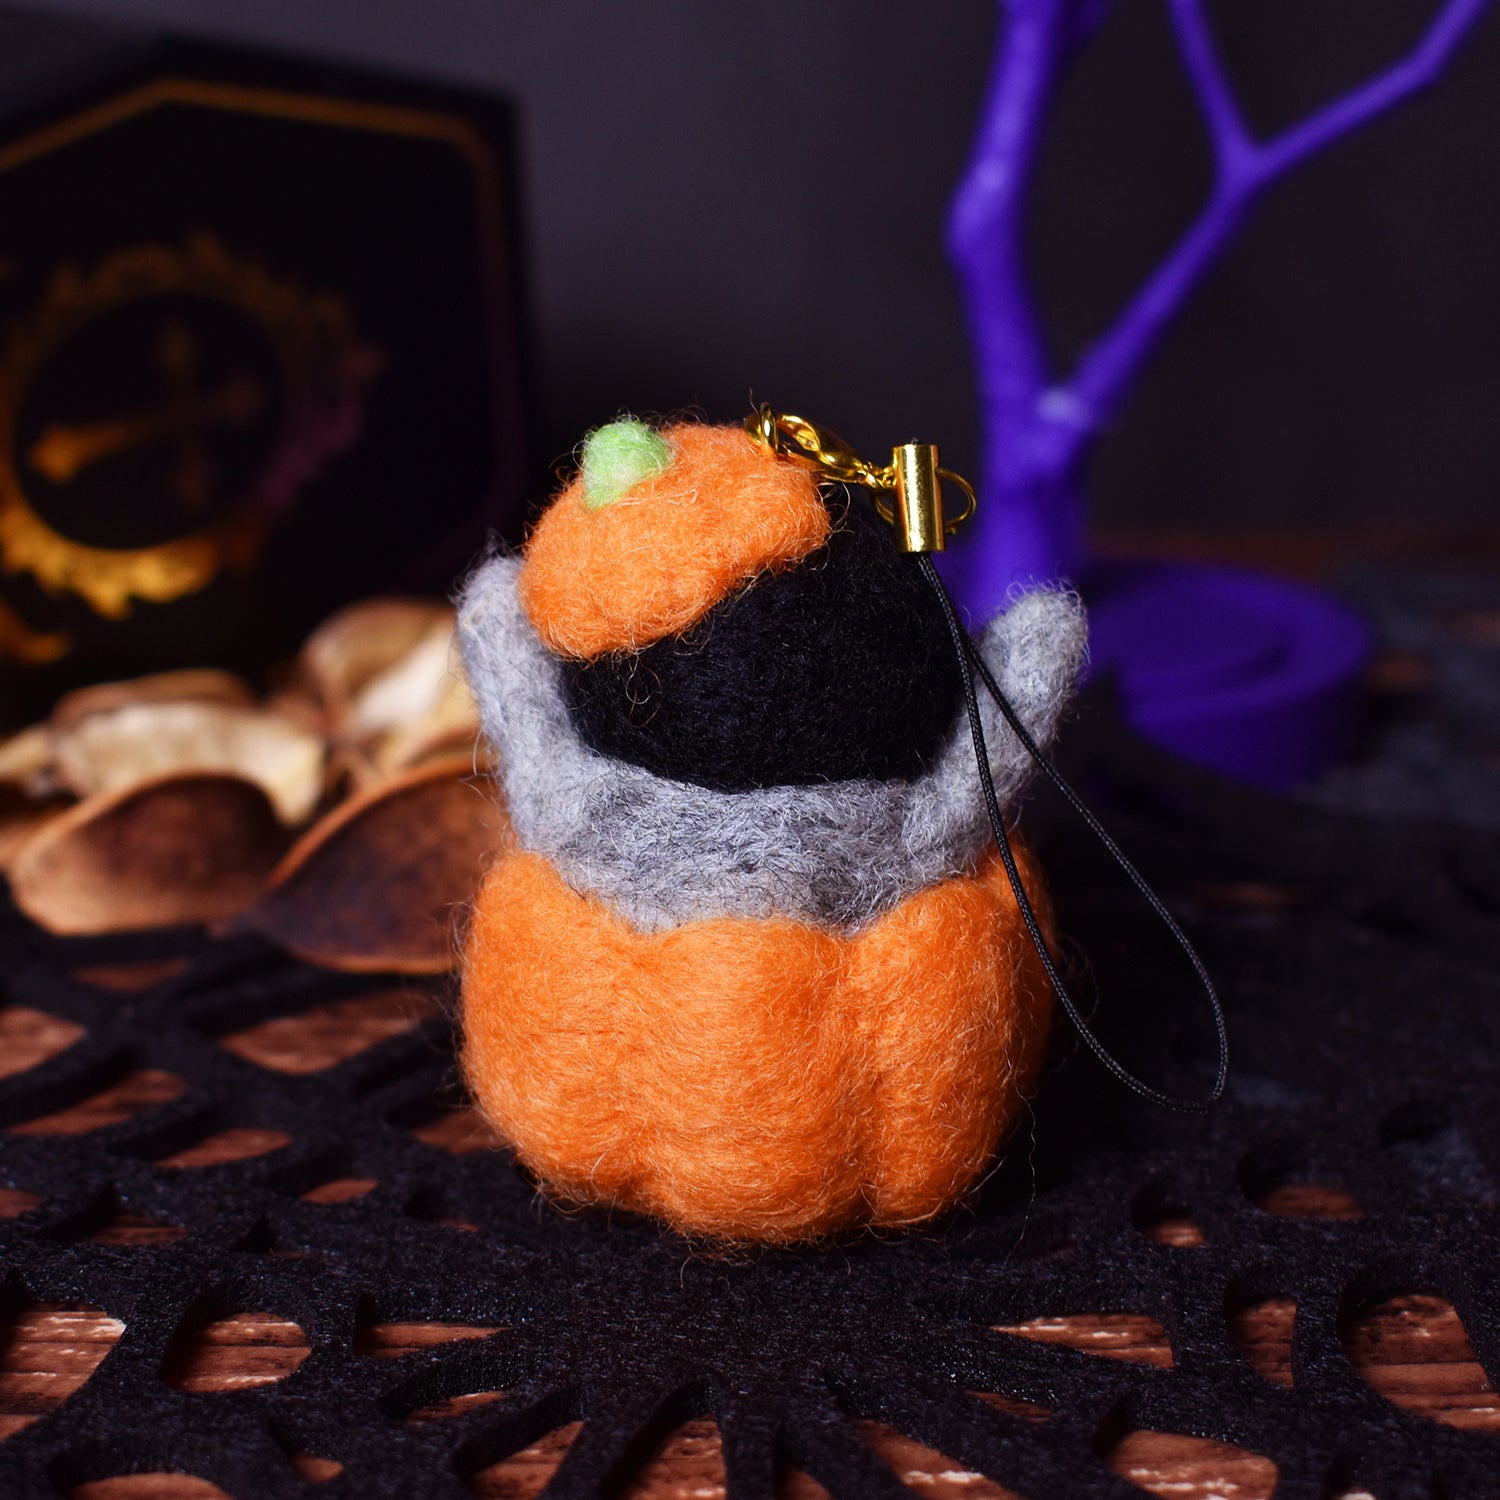 Trick or Treat! Penguin Coming Out of a Pumpkin Needle Felted Keychain -Halloween Limited Edition-